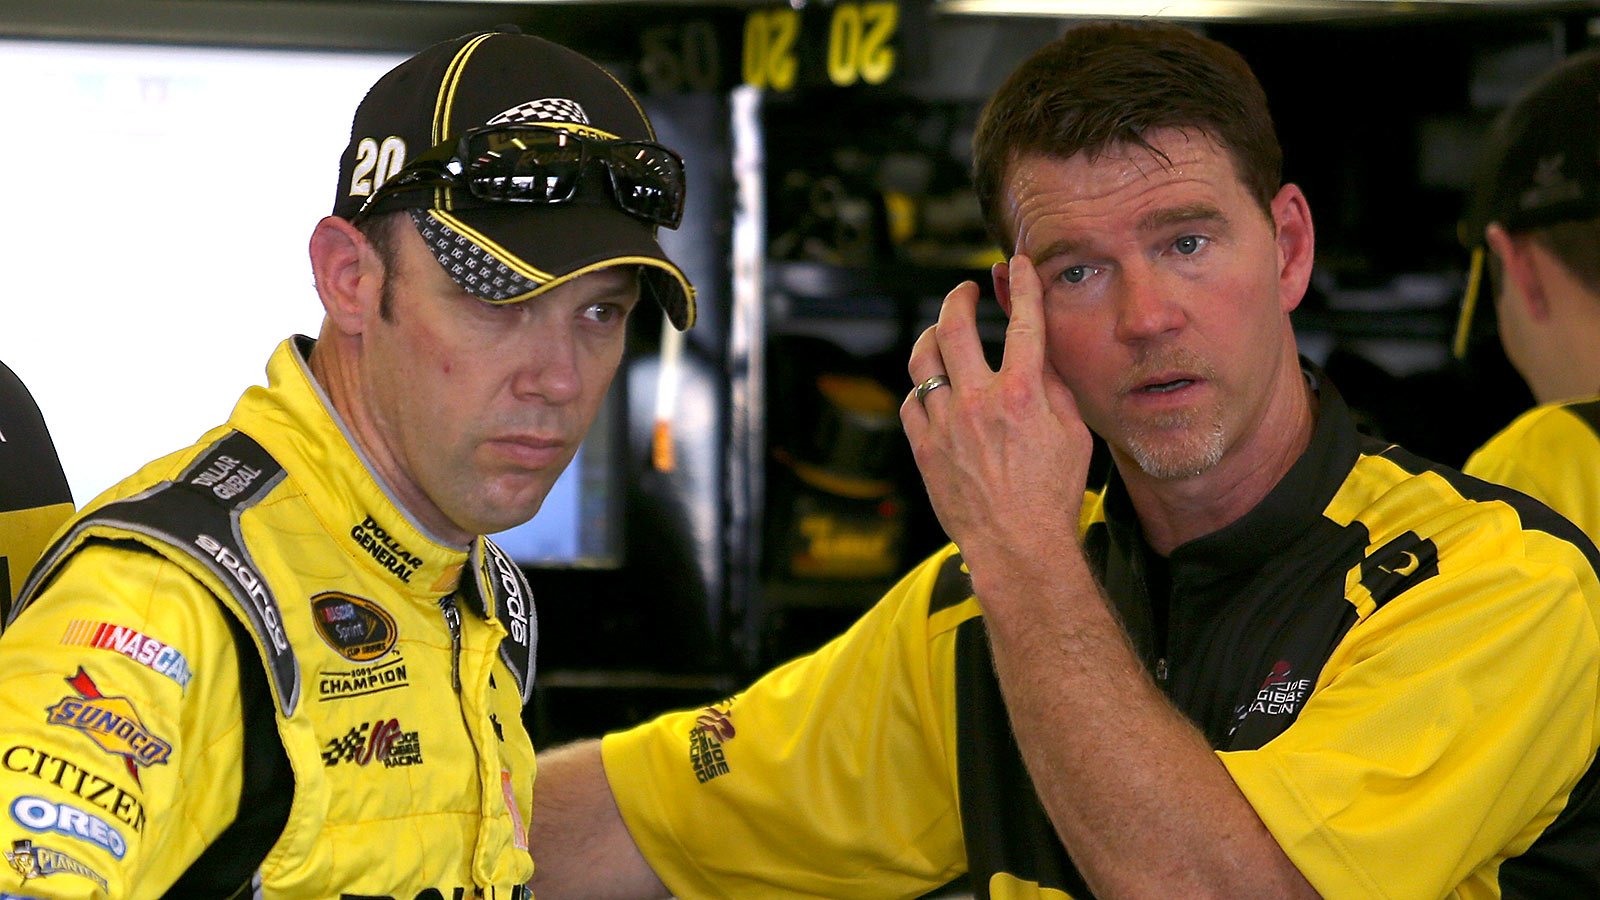 Challenges met: Kenseth overcomes problems, looks to faster future